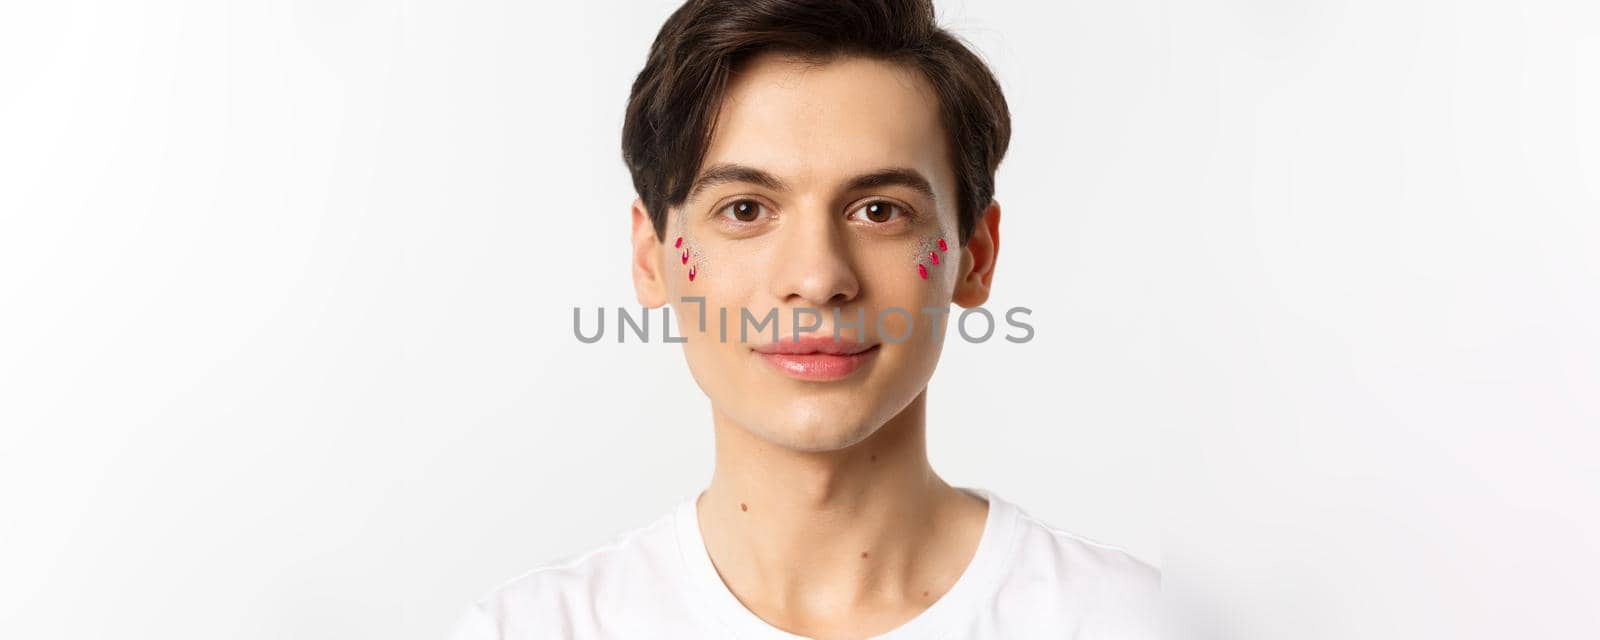 People, lgbtq and beauty concept. Close-up of happy queer guy with applied lip gloss and glitter, smiling and looking at camera, standing over white background.